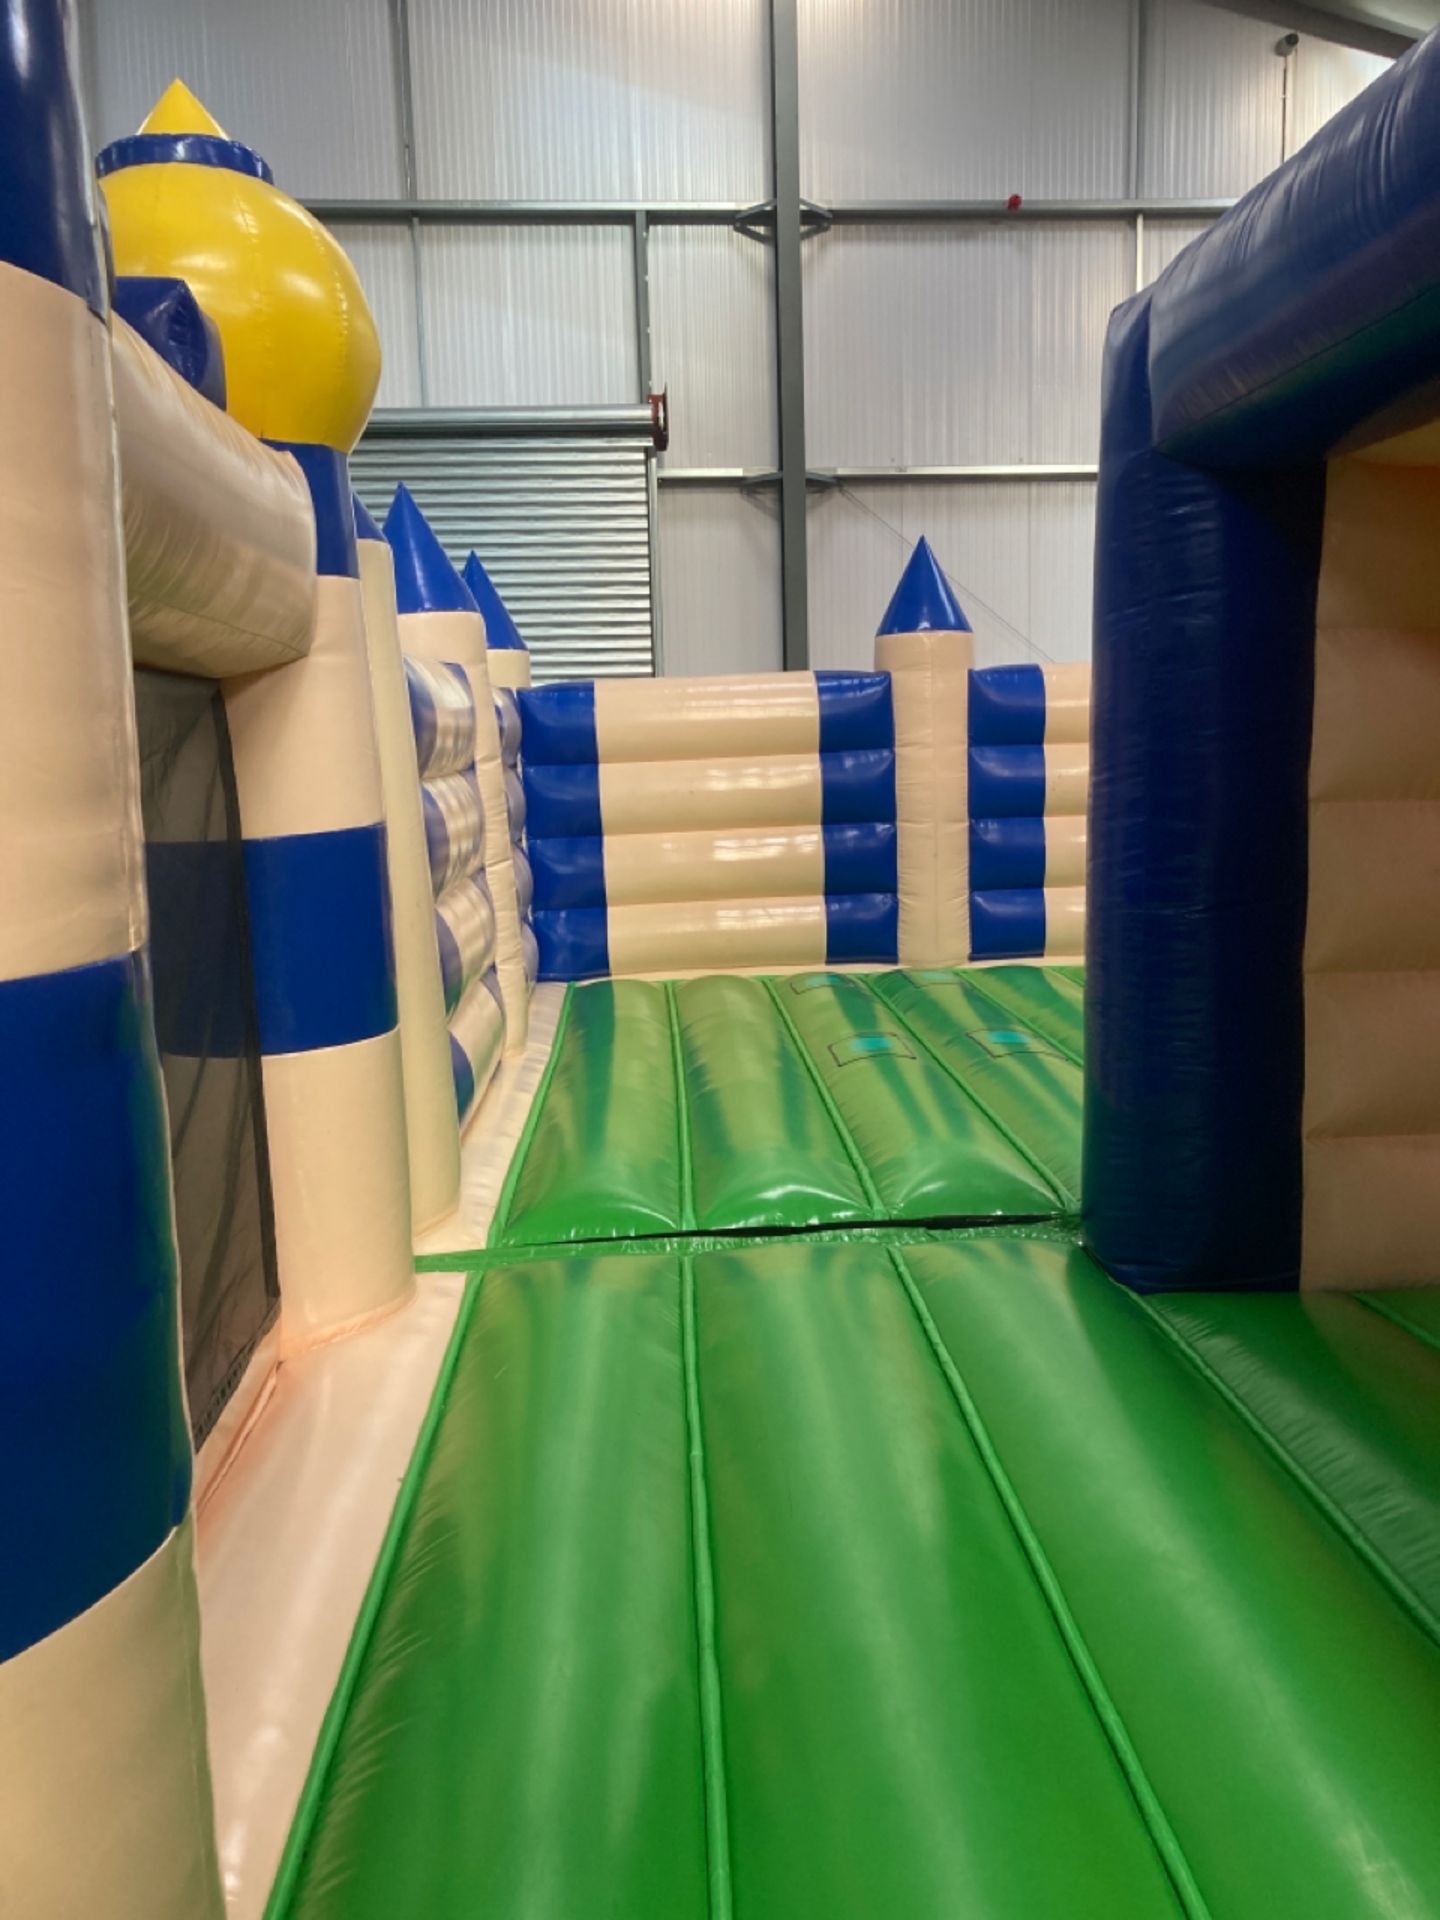 Inflatable bouncy castle - Image 7 of 22